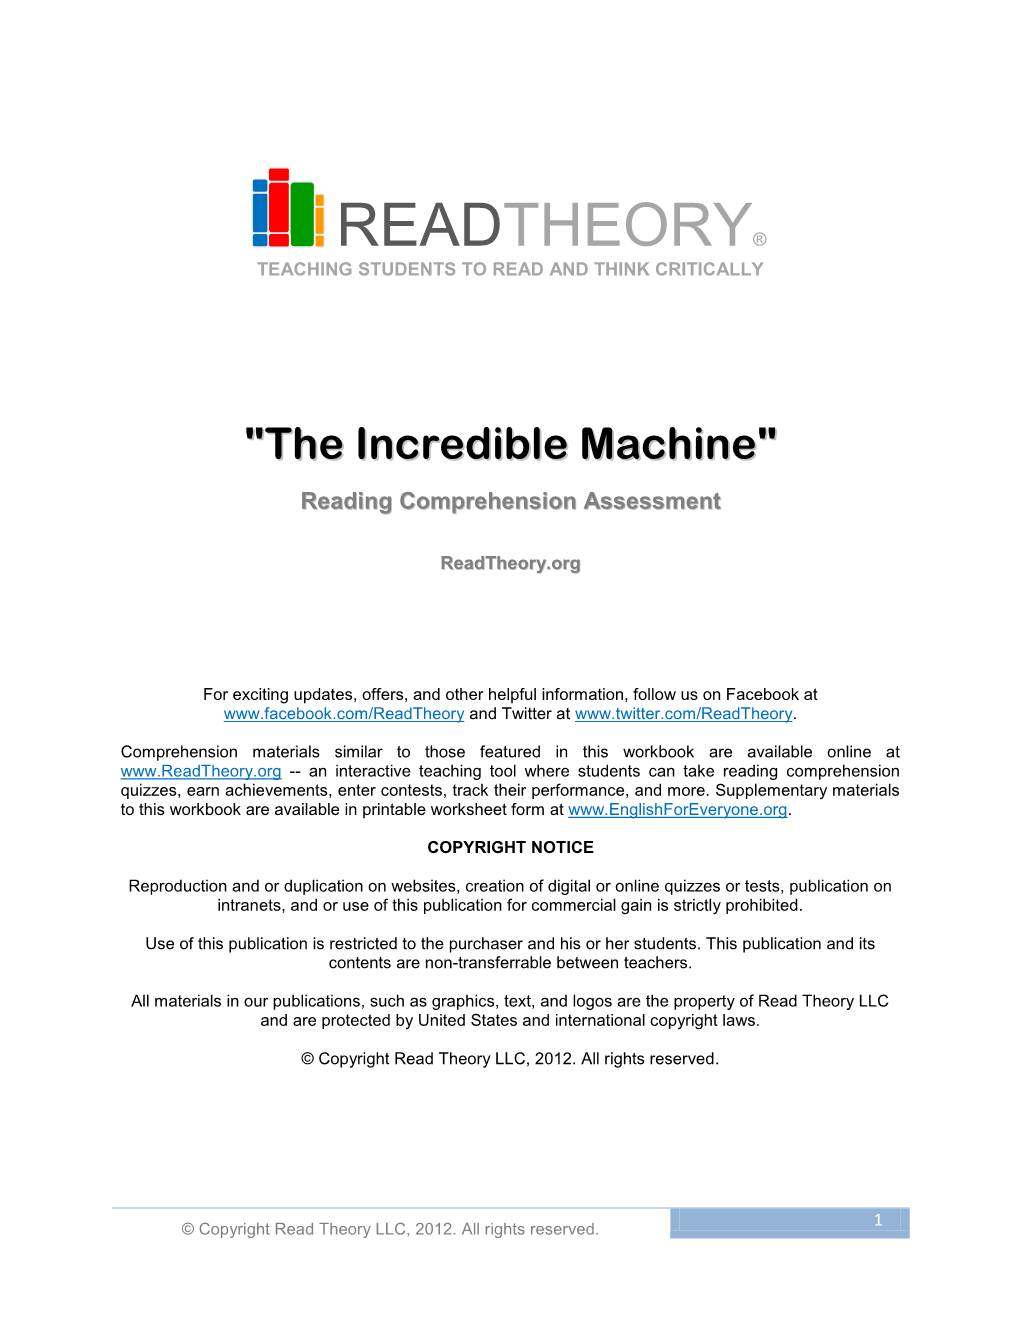 Readtheory® Teaching Students to Read and Think Critically